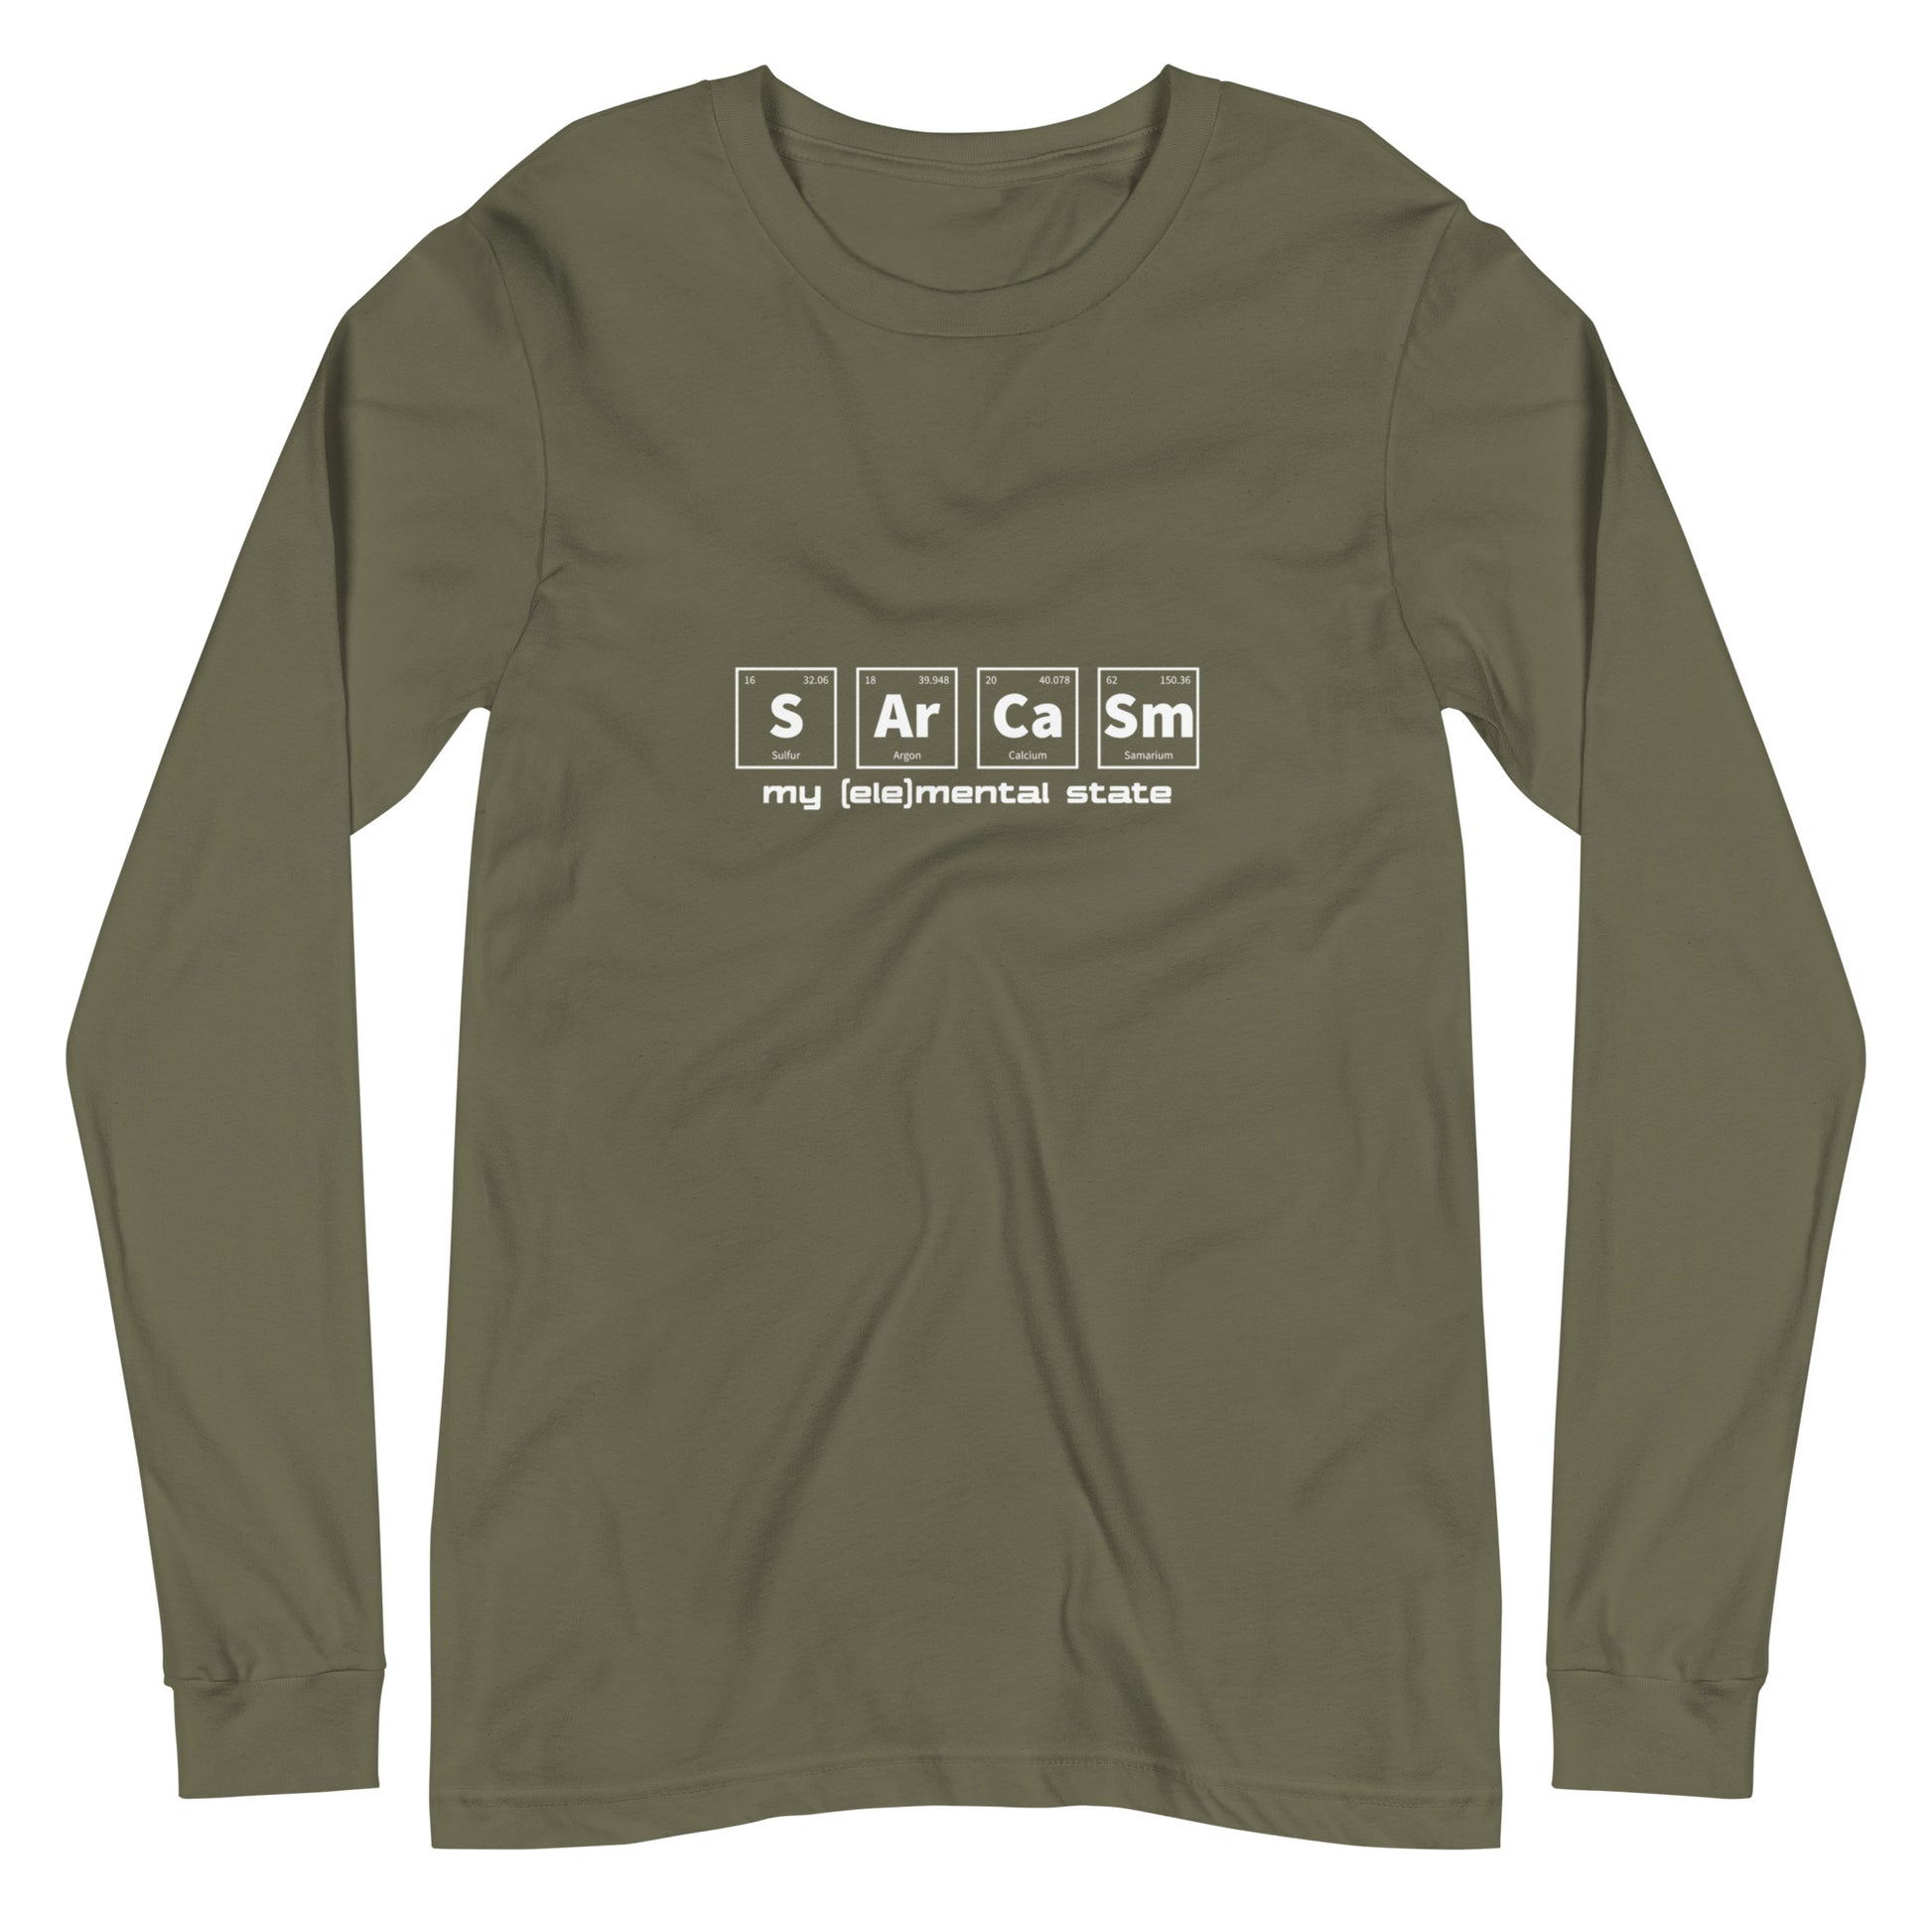 Military Green (olive) long sleeve t-shirt with graphic of periodic table of elements symbols for Sulfur (S), Argon (Ar), Calcium (Ca), and Samarium (Sm) and text "my (ele)mental state"